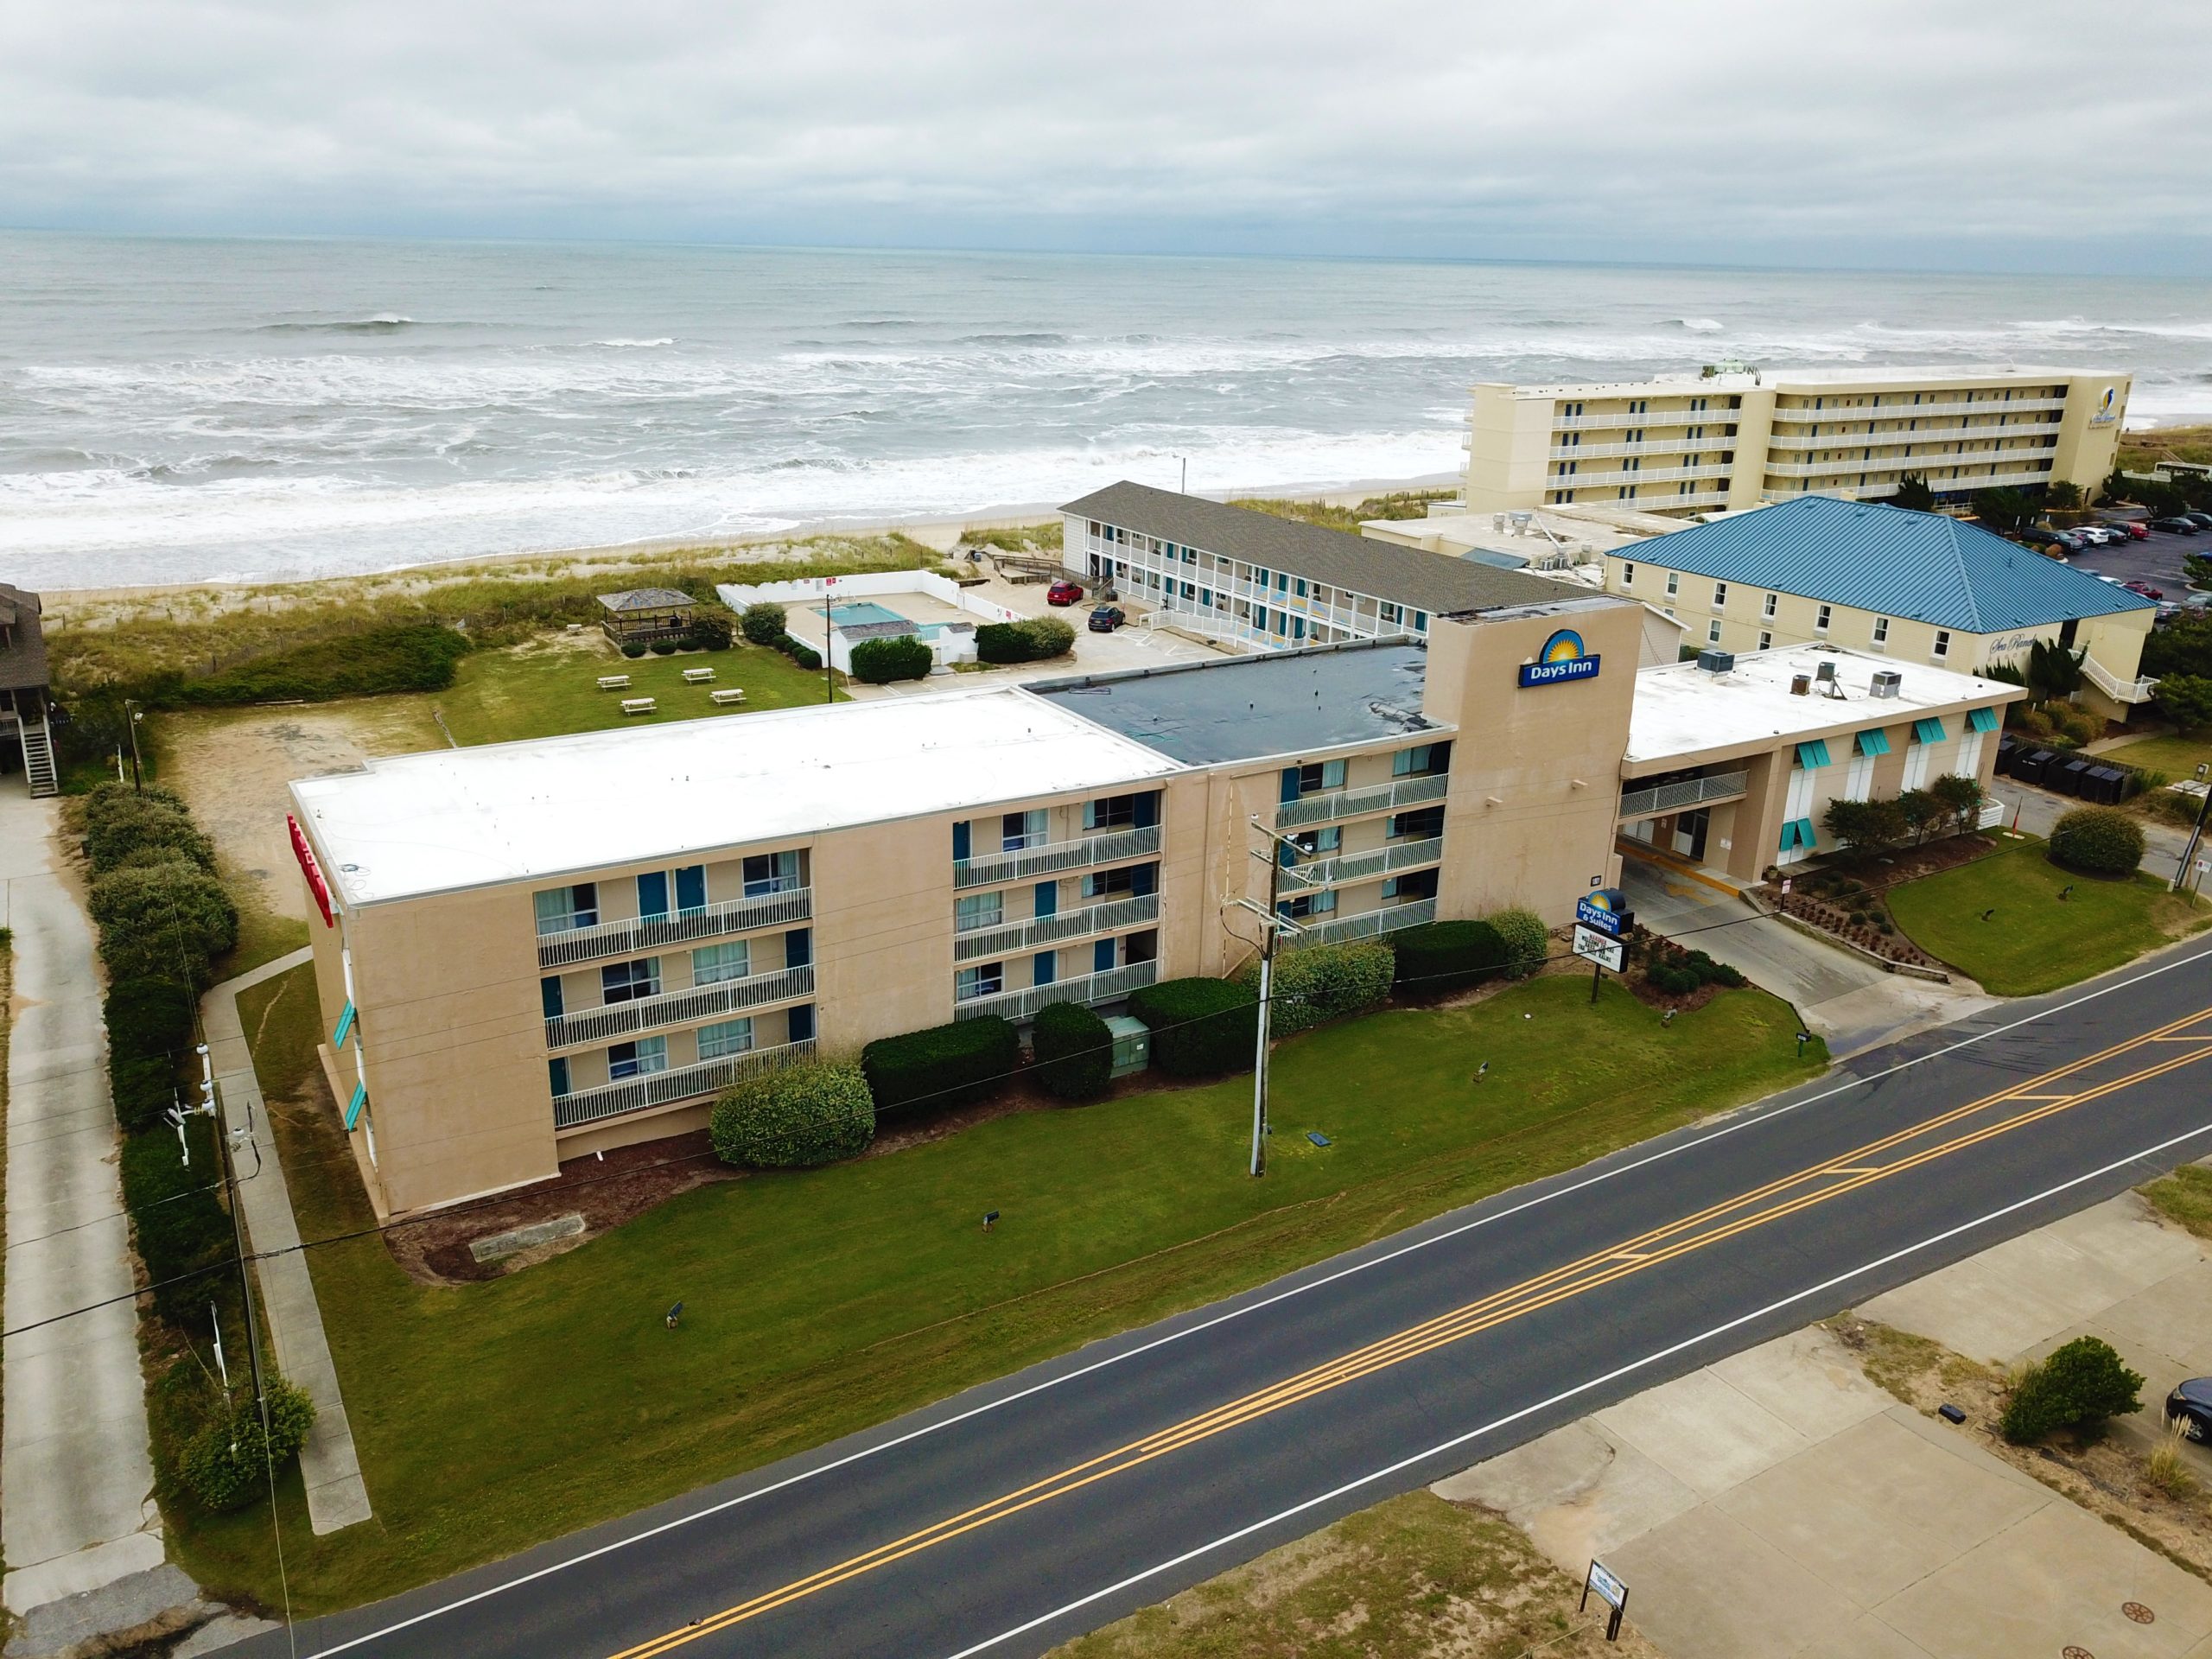 Marcus & Millichap : Brokers the Sale of an Oceanfront Hotel in the Outer Banks